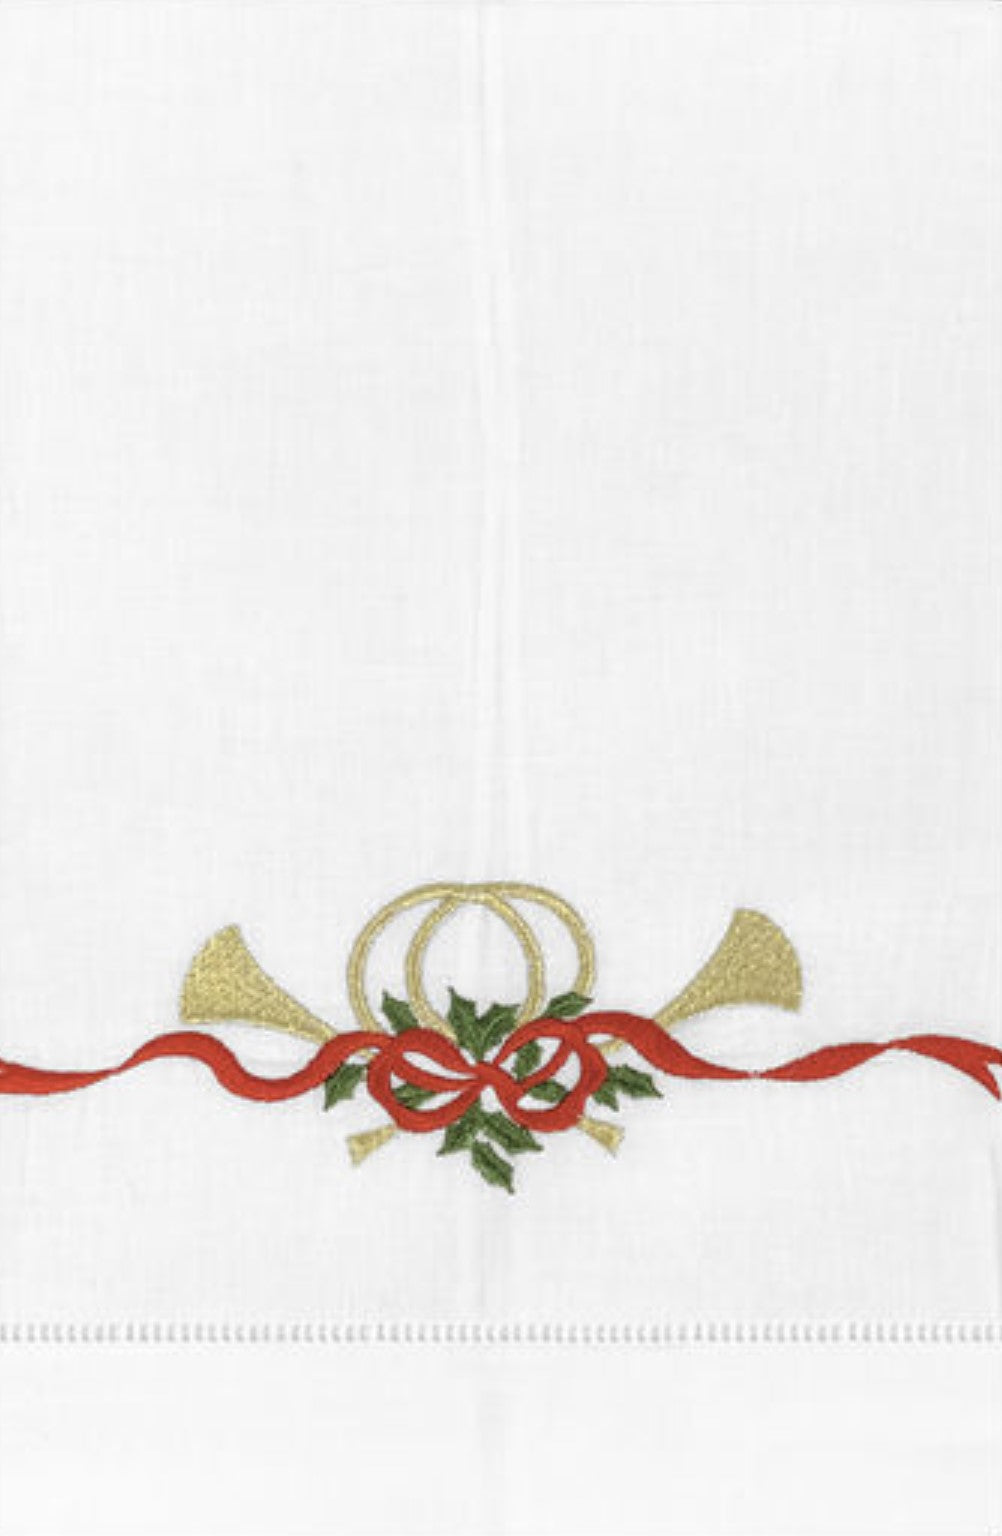 Hemstitched Guest Towel with Horns Christmas Embroidery